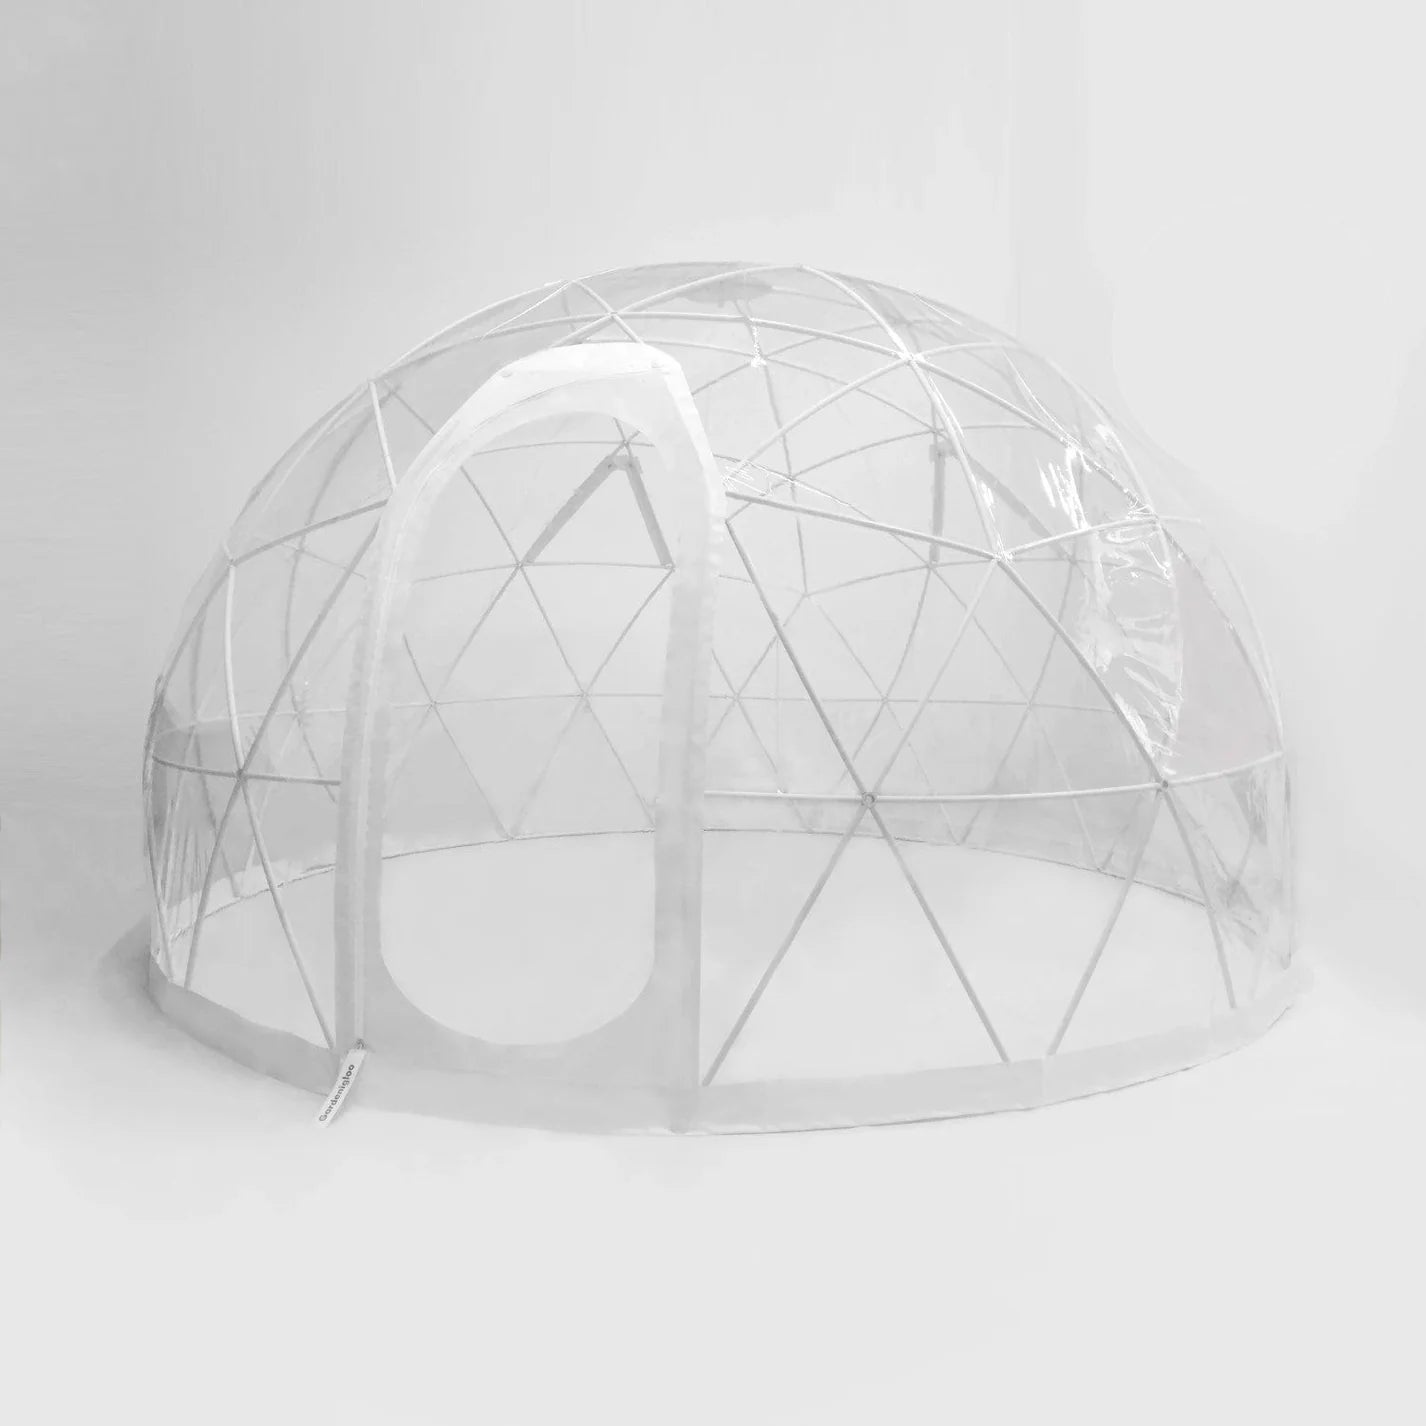 Garden Igloo Dome Replacement Er